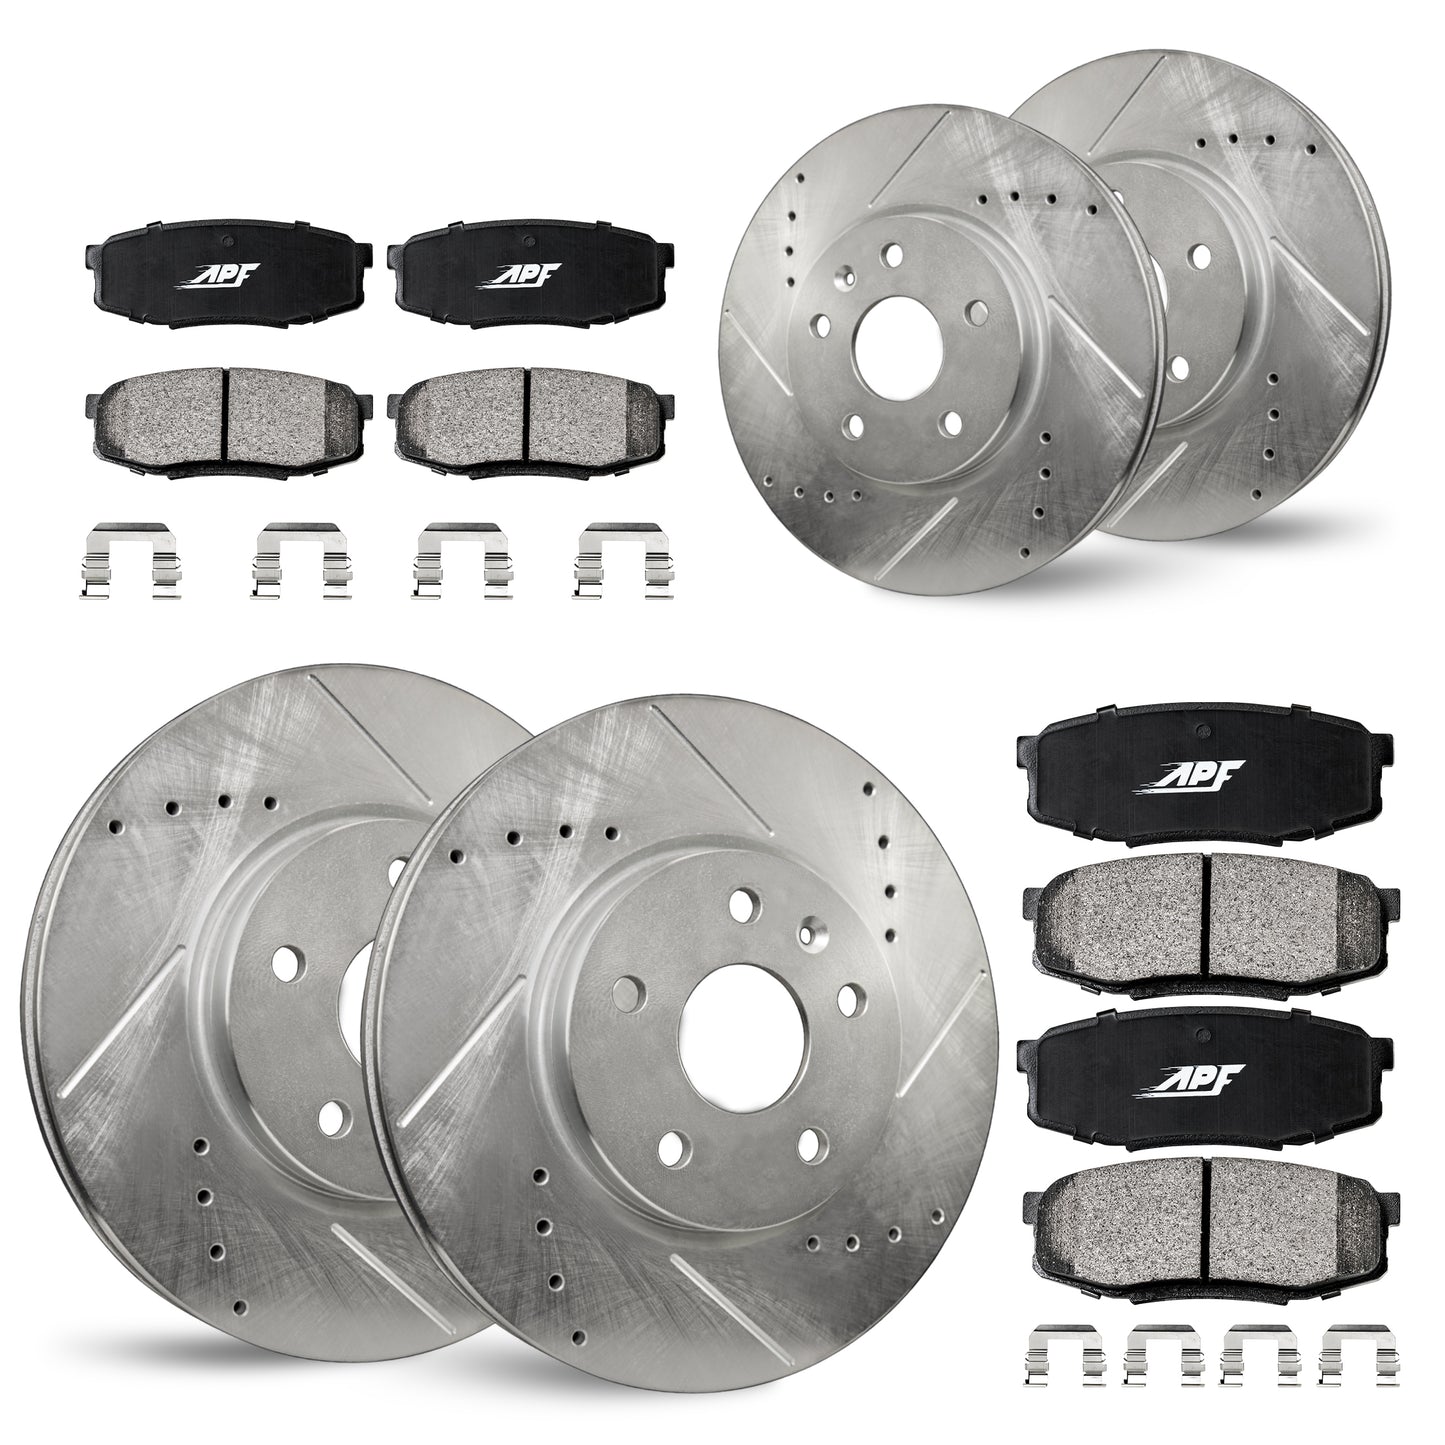 APF Full Kit compatible with Lexus GS300 1998-2005 | Zinc Drilled Slotted Rotors with Ceramic Carbon Fiber Brake Pads